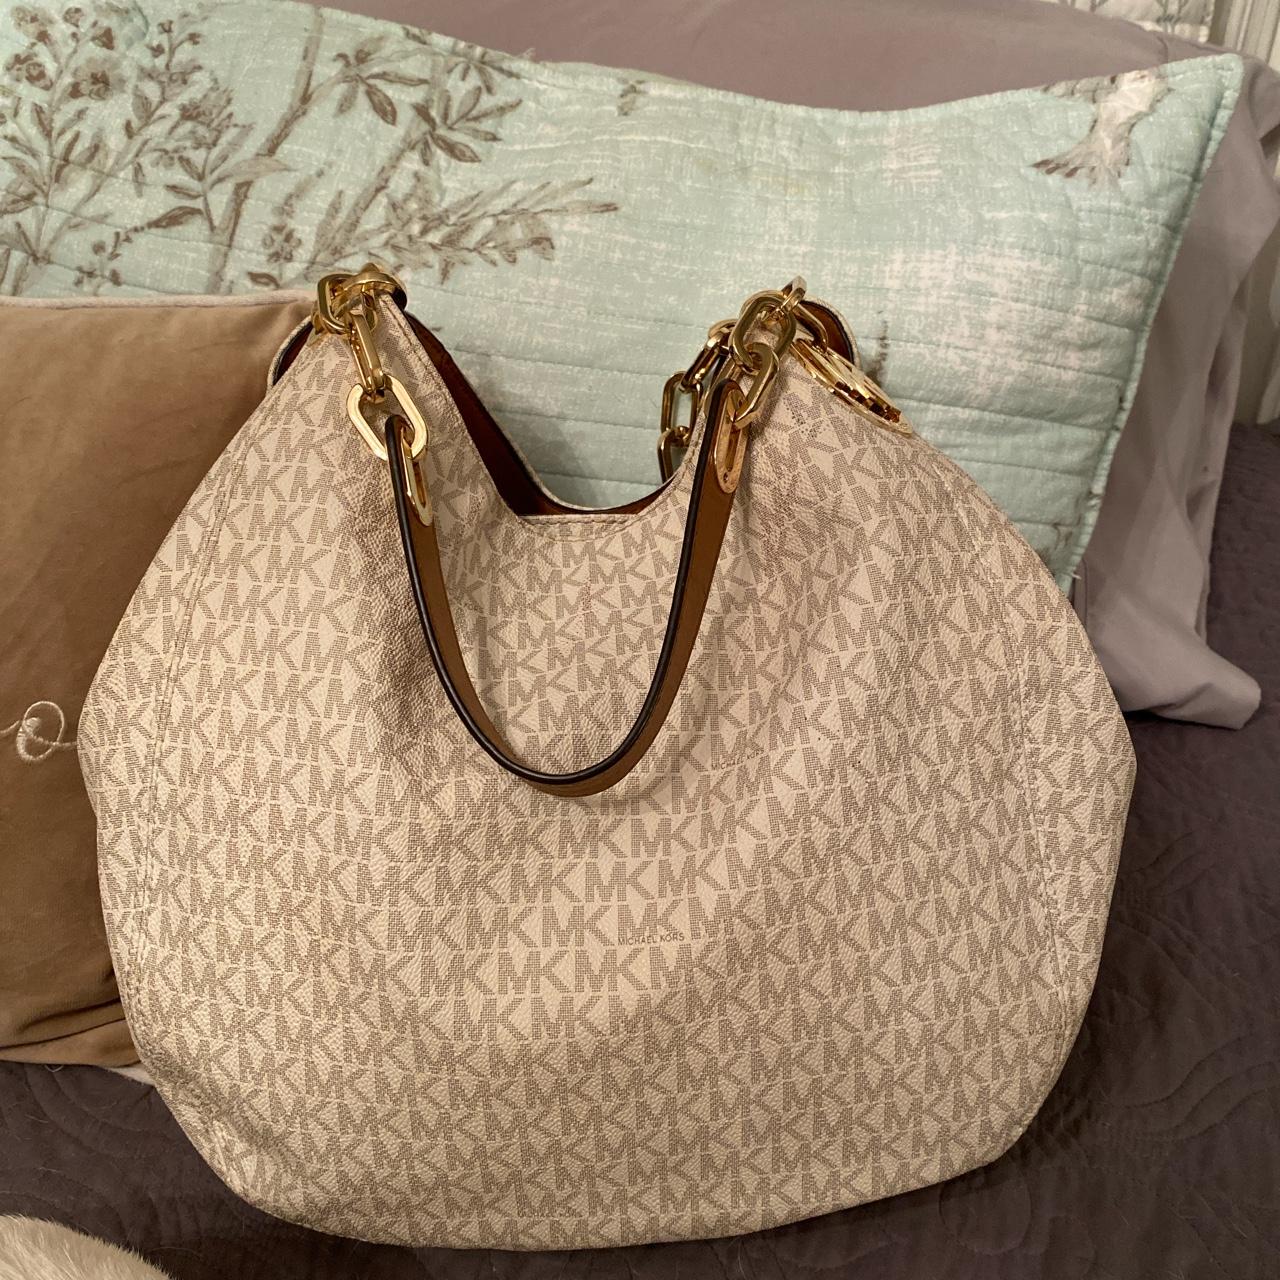 Michael Kors Side Bag  http://www.collegefashionista.com/school/view/university_of_florida/style_advice_of_the_week_croppe…  | Side bags, Stylish school bags, Mk bags